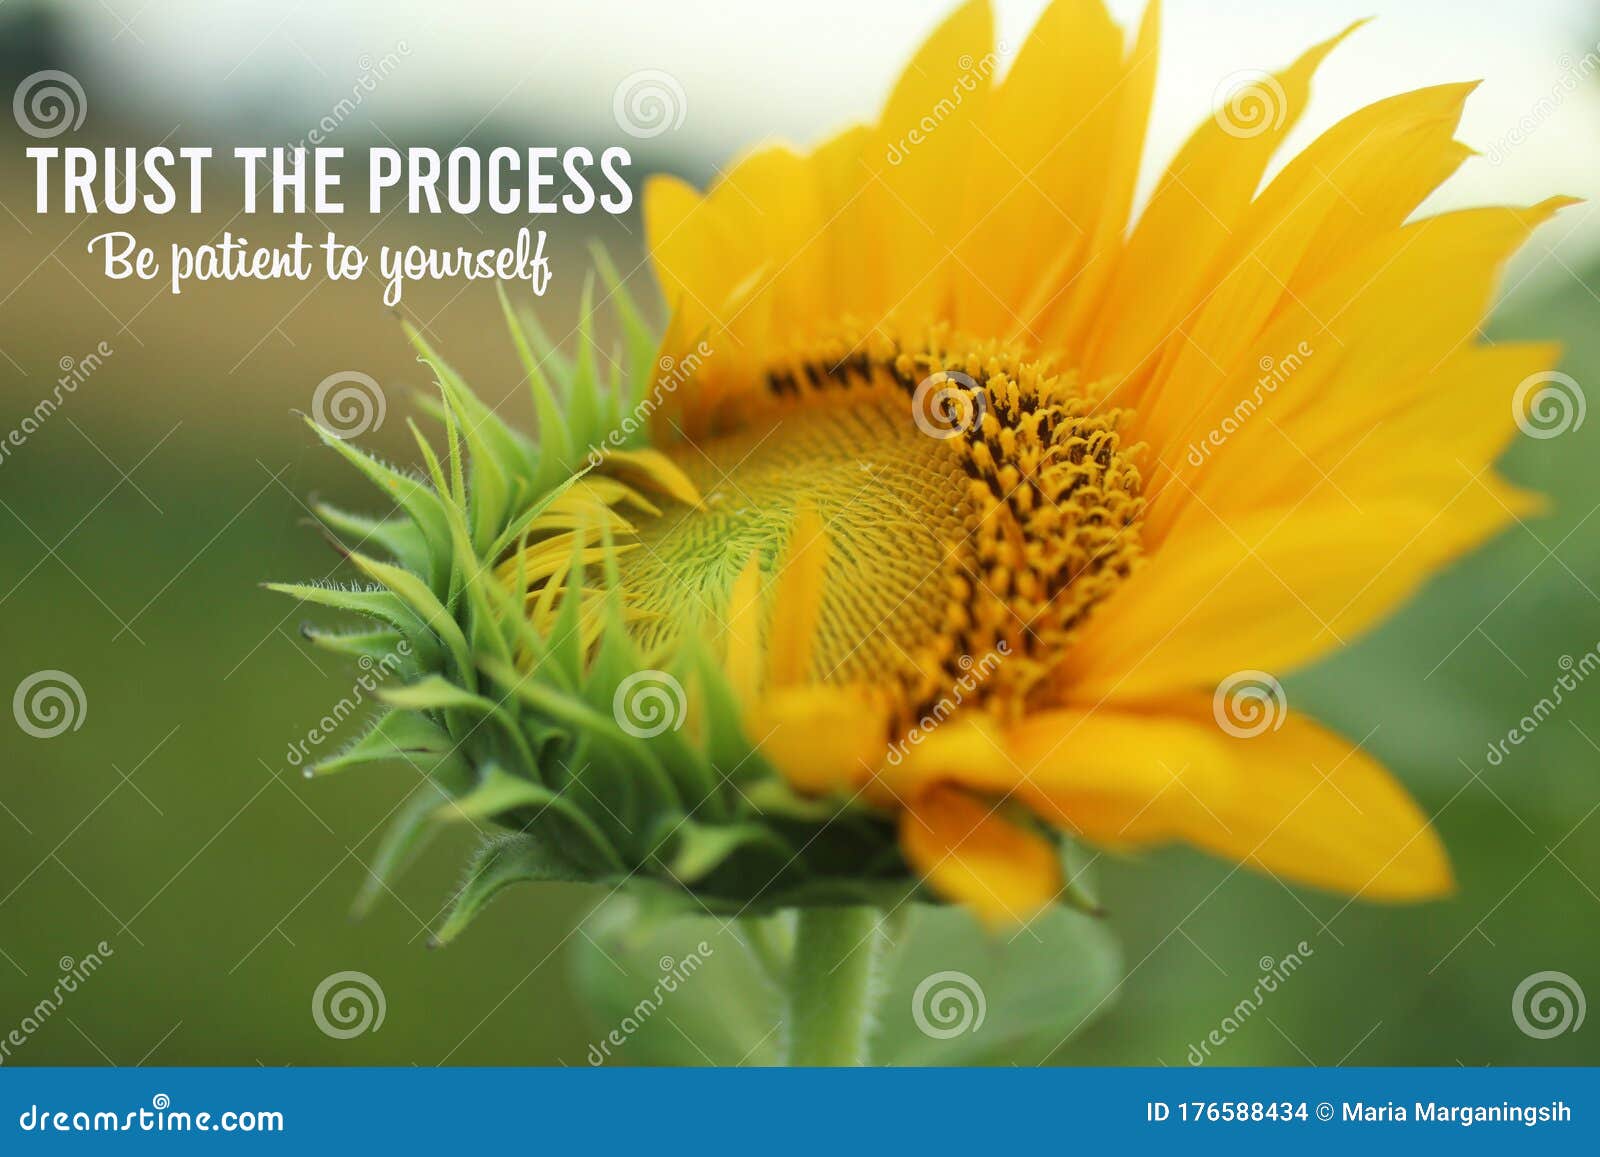 inspirational quote - trust the process. be patient to yourself. with fresh sunflower start to bloom in the morning in the garden